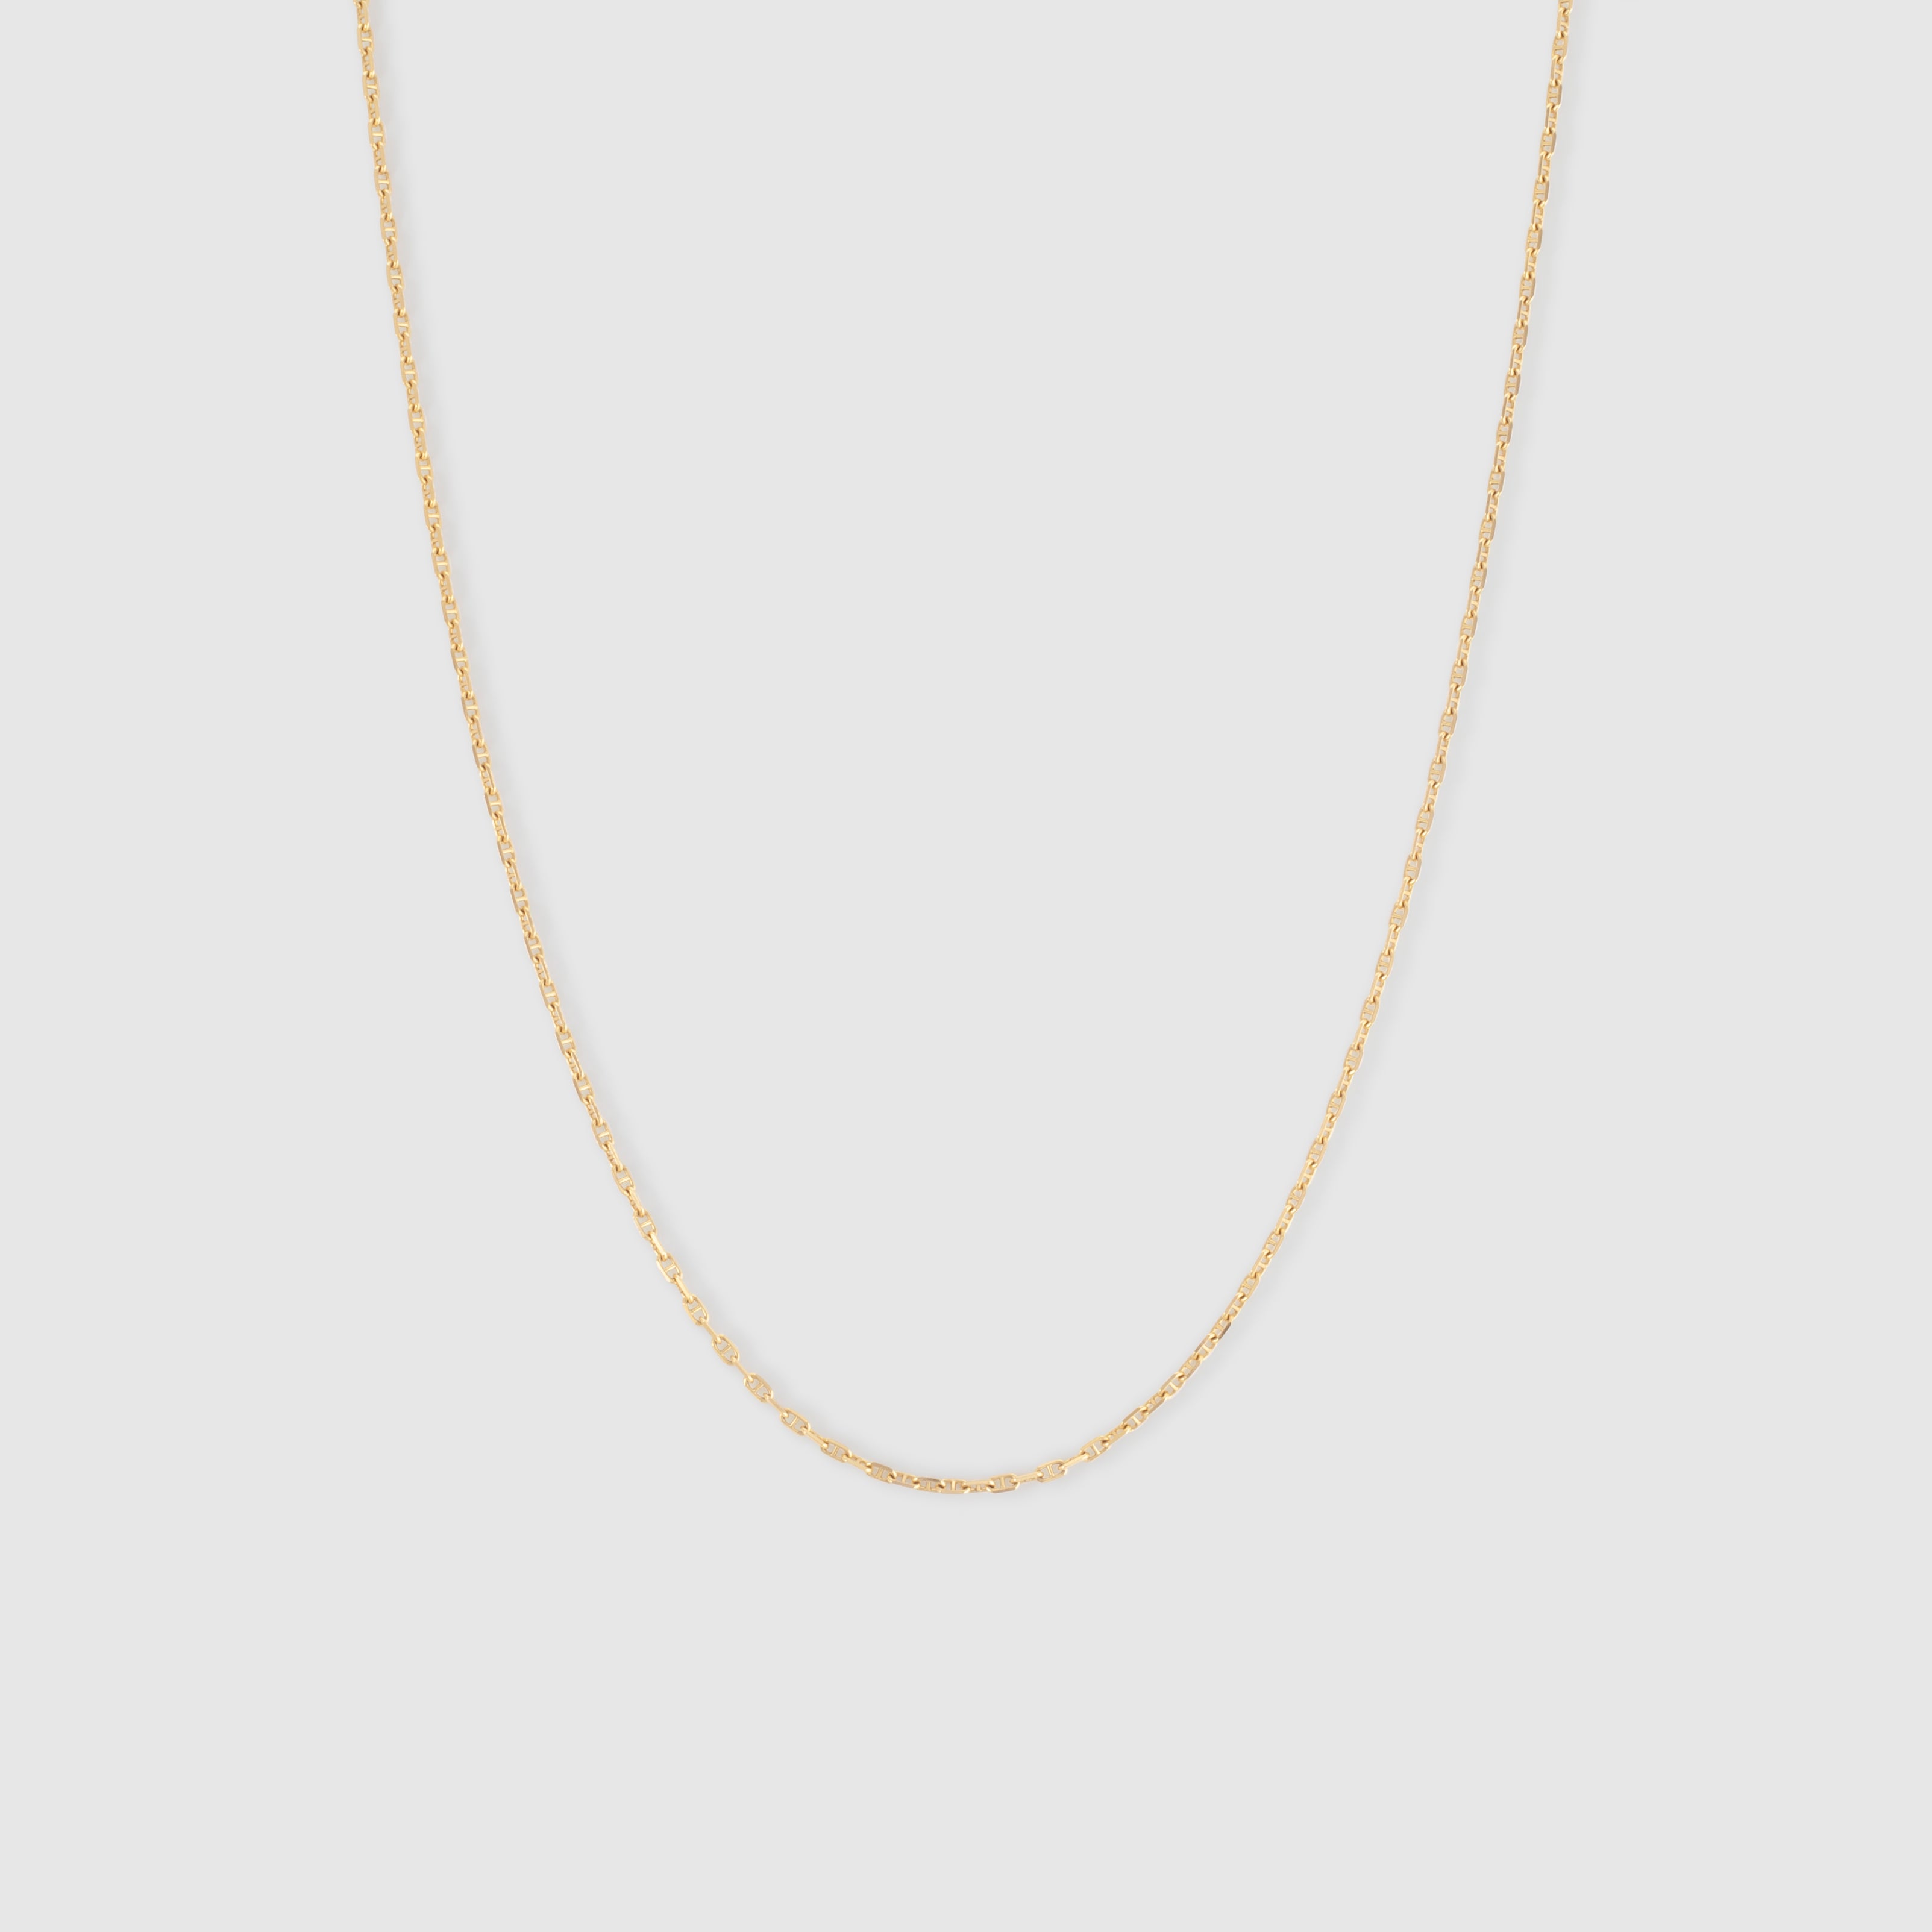 Classic Anchor Chain Link Necklace in 10K Yellow Gold.